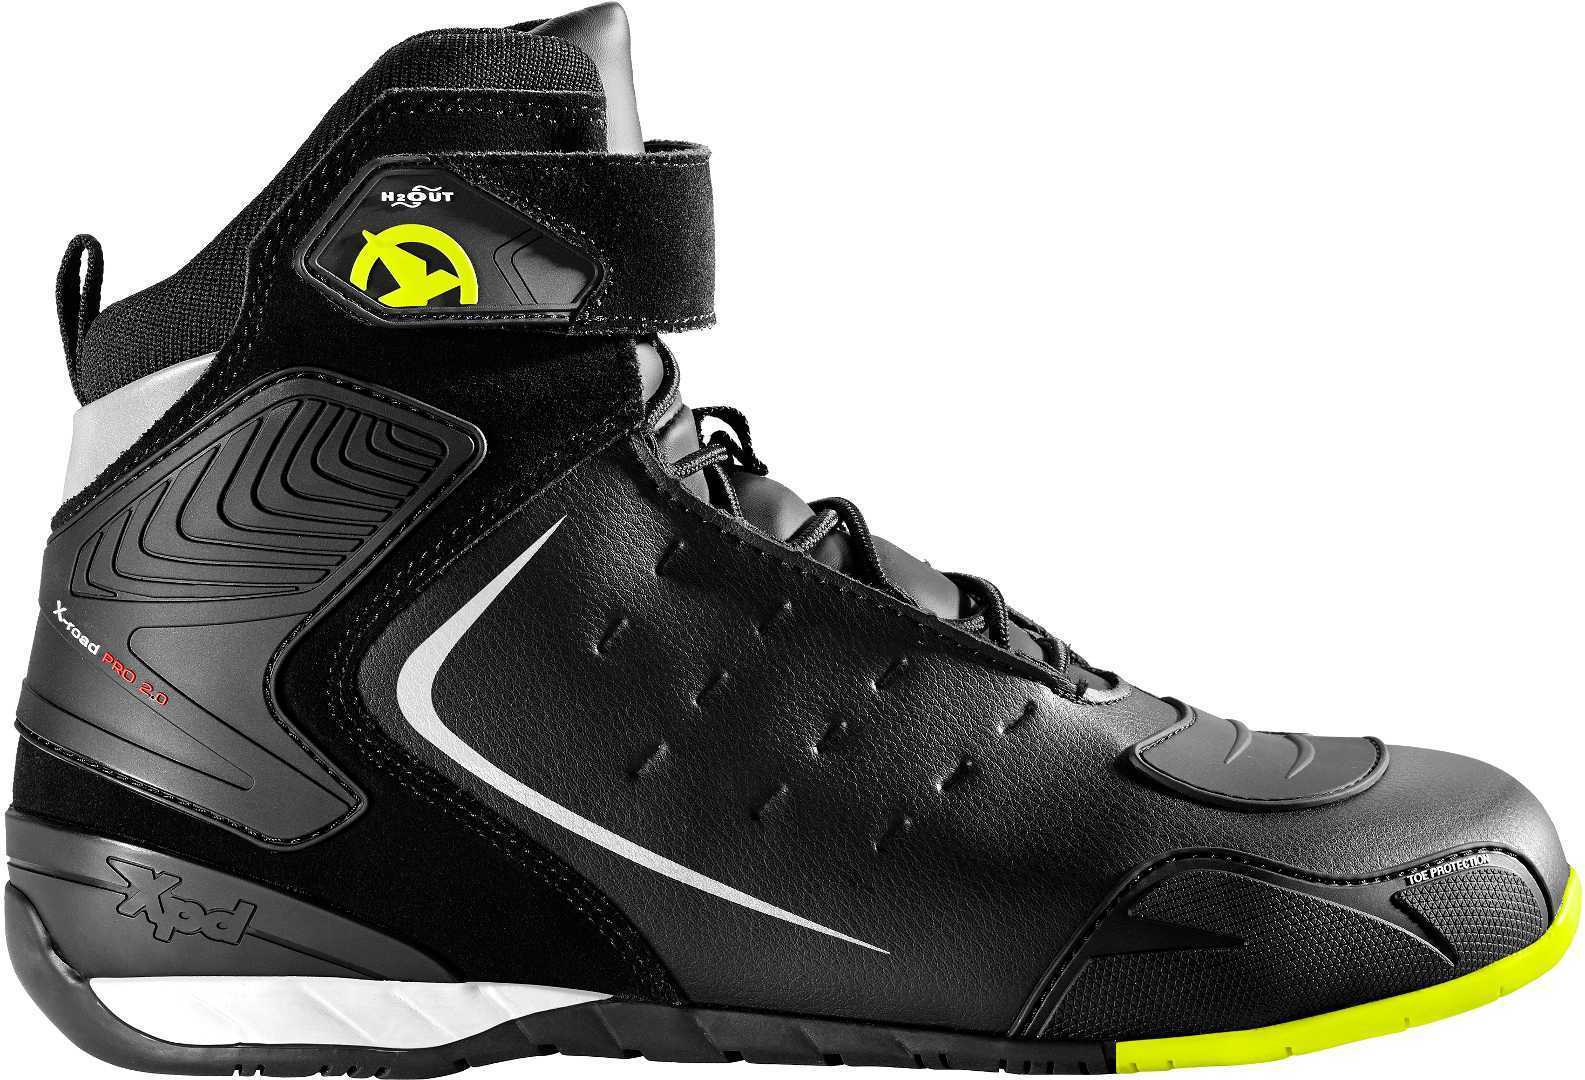 Image of XPD X-Road H2Out Yellow Fluo Size 40 EN